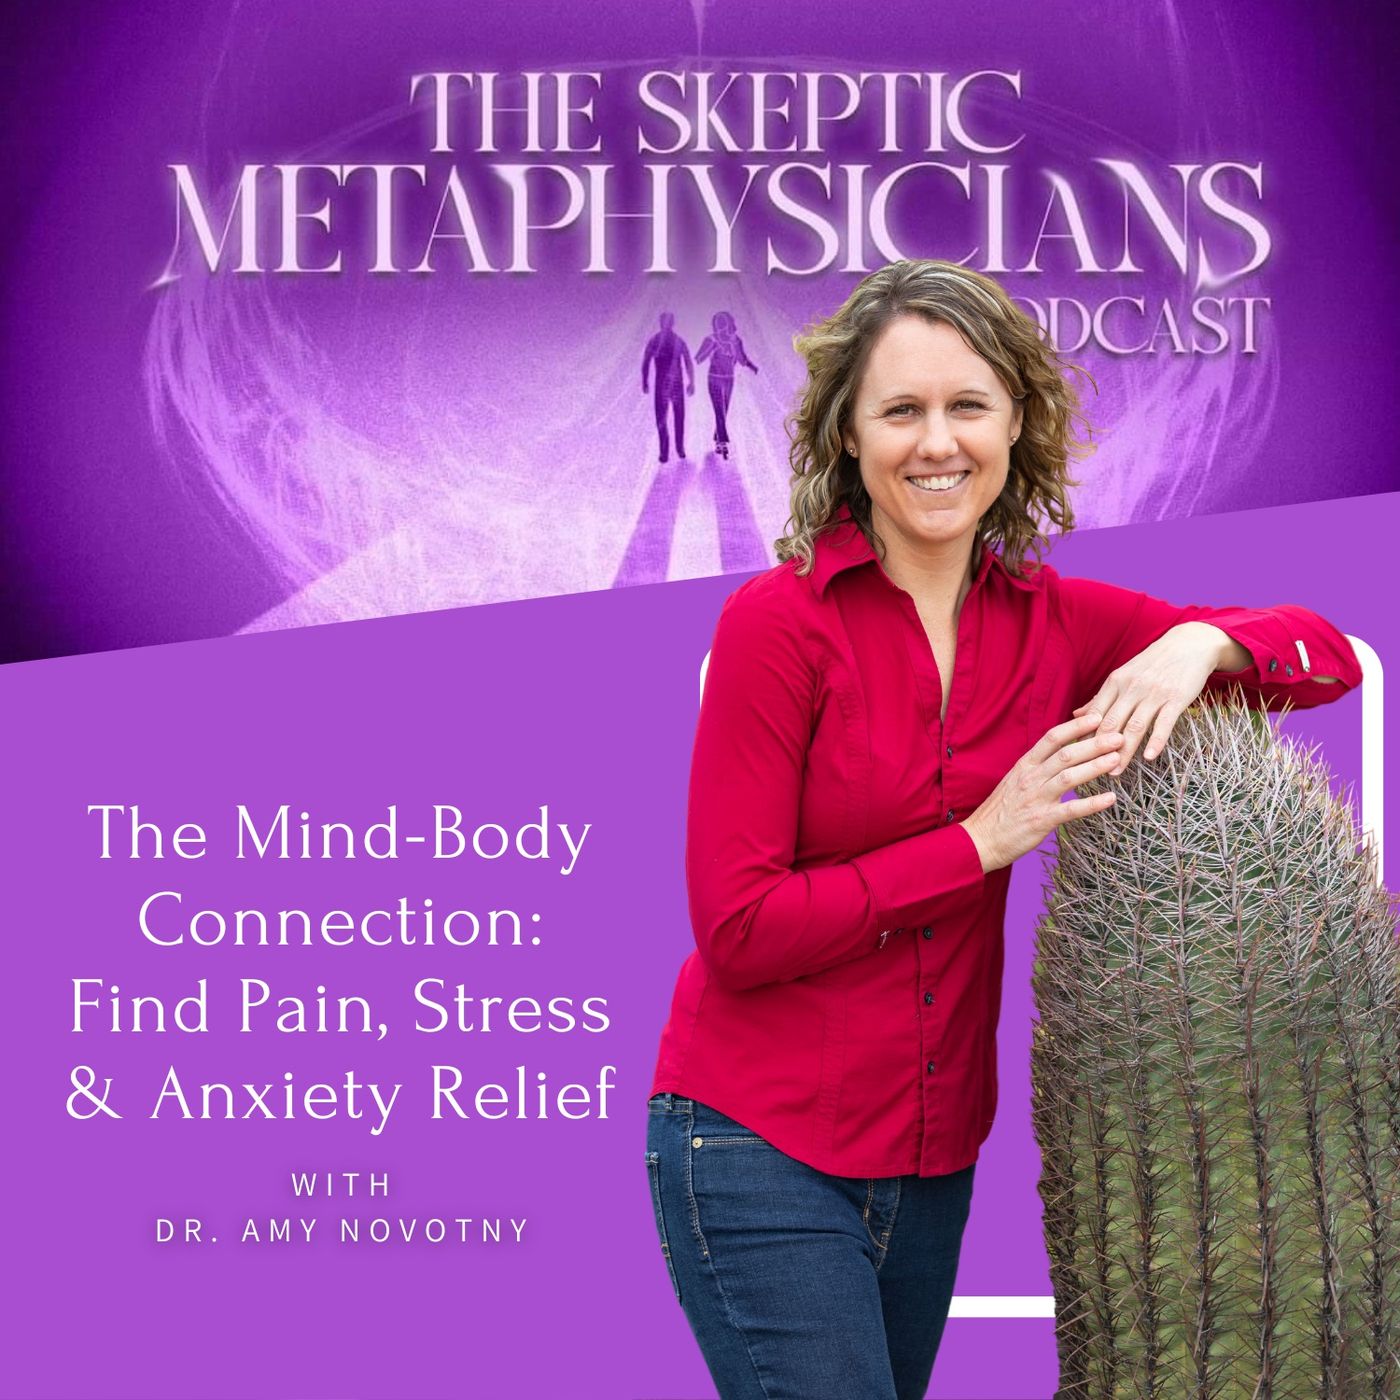 The Mind-Body Connection: Find Pain, Stress & Anxiety Relief